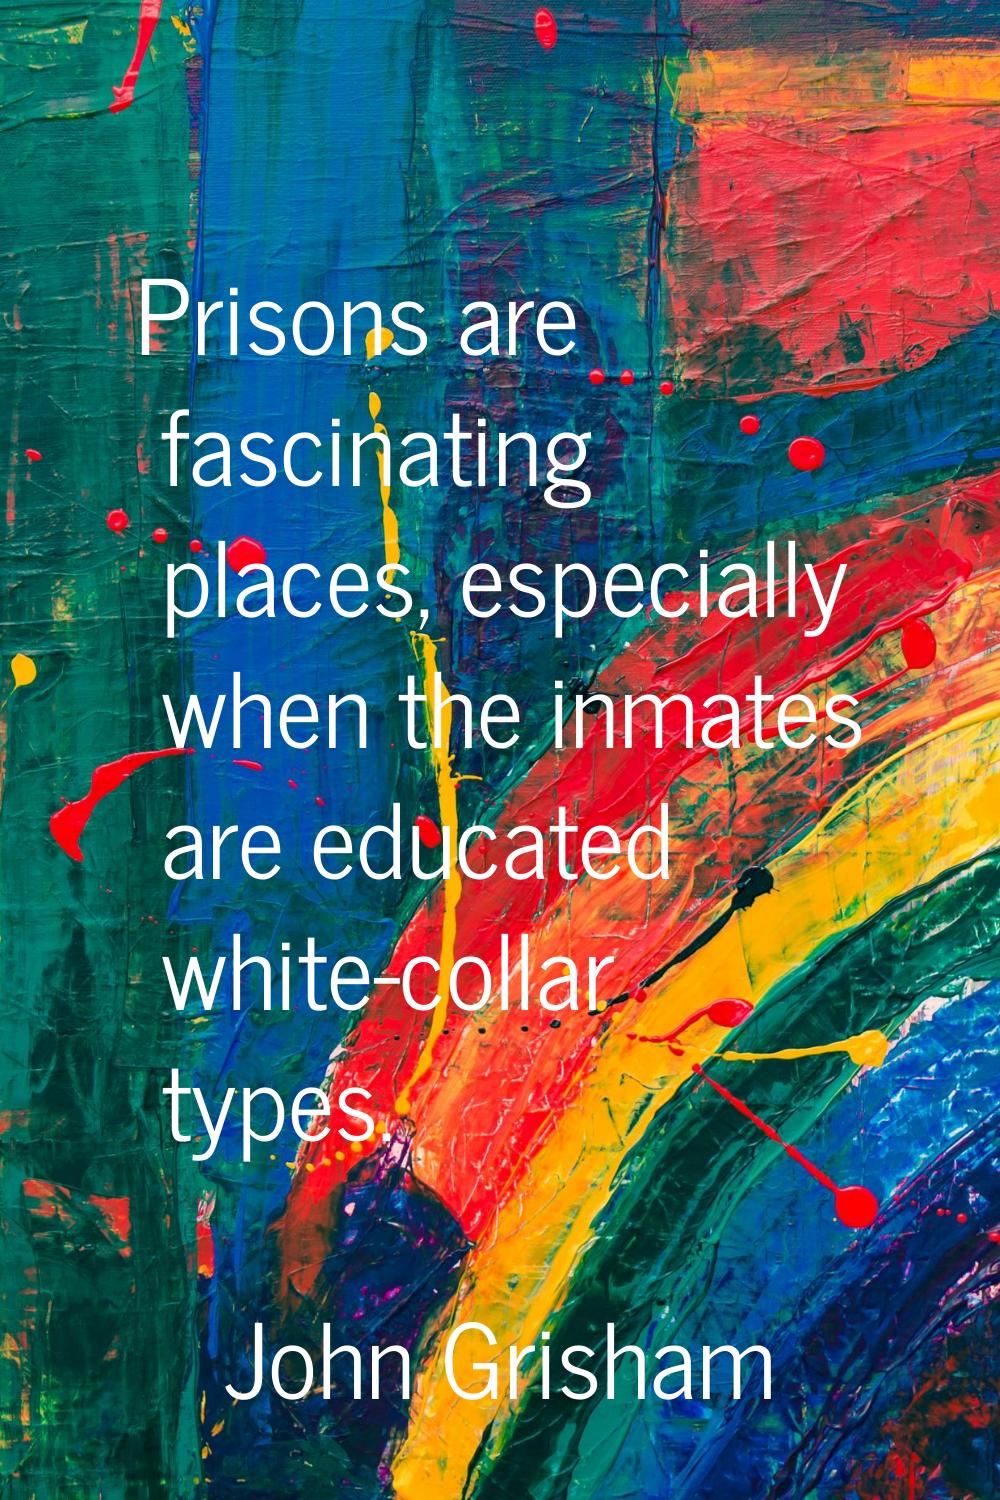 Prisons are fascinating places, especially when the inmates are educated white-collar types.